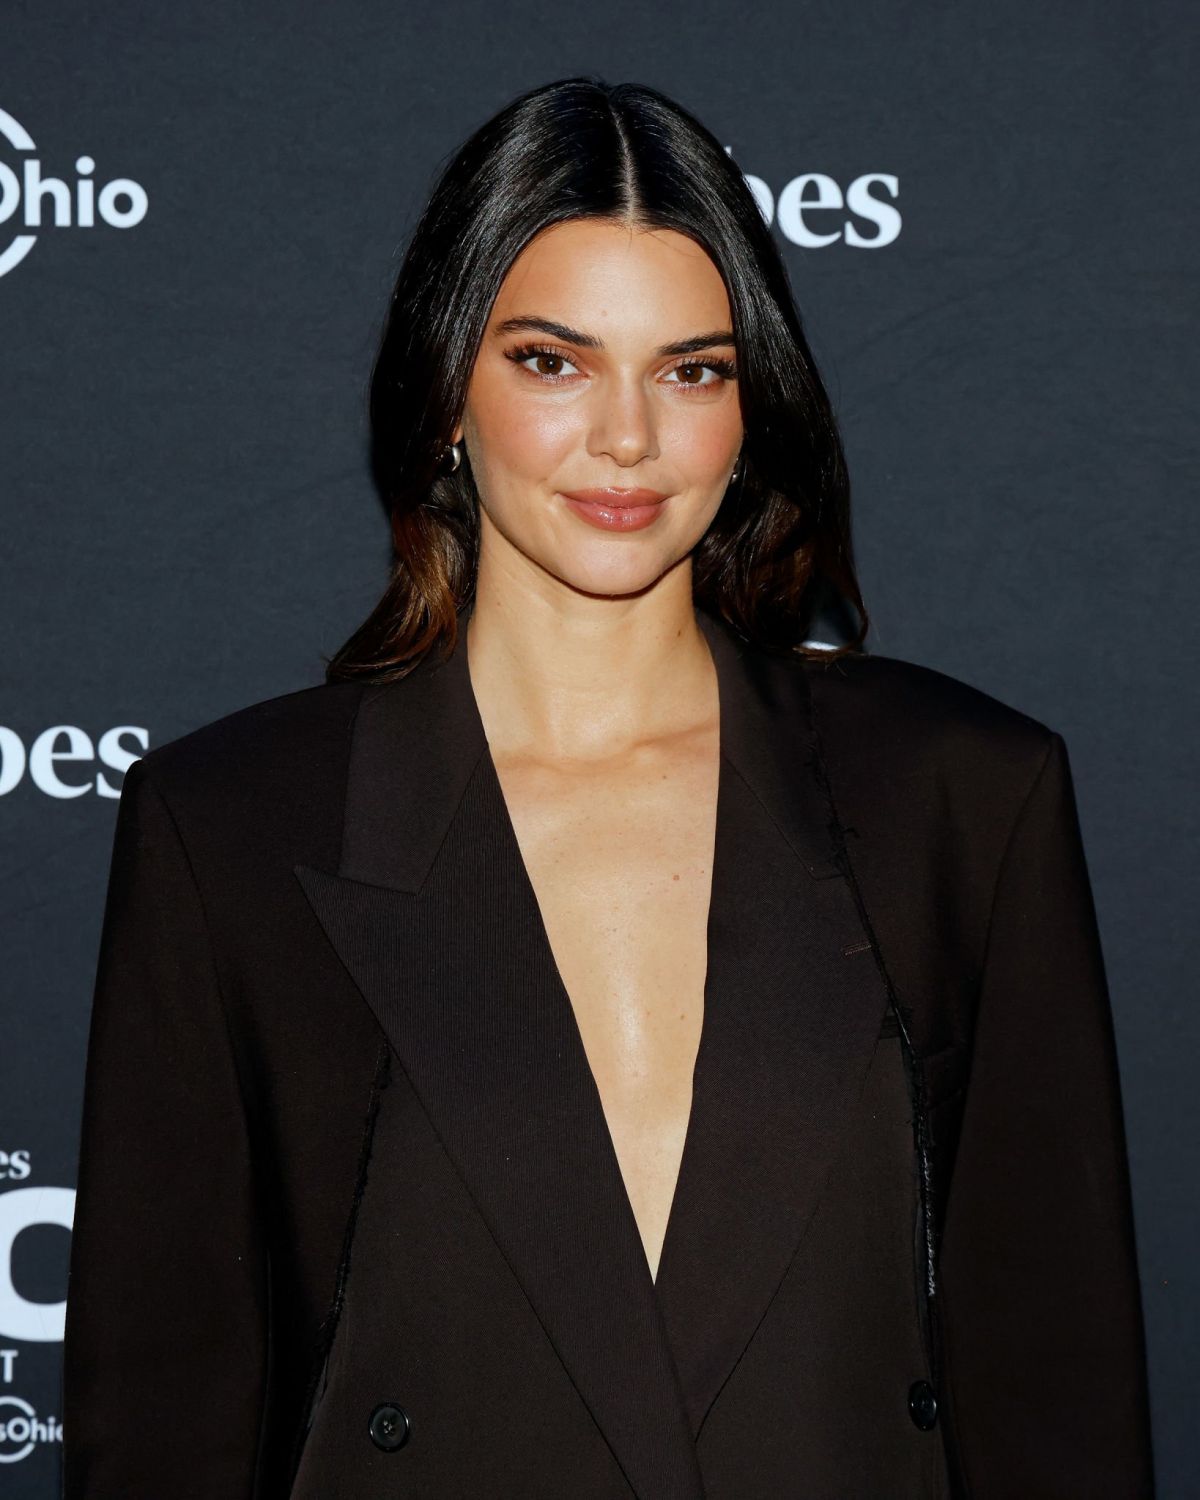 https://www.hawtcelebs.com/wp-content/uploads/2023/10/kendall-jenner-at-2023-forbes-30-under-30-summit-at-cleveland-public-auditorium-in-cleveland-10-09-2023-1.jpg